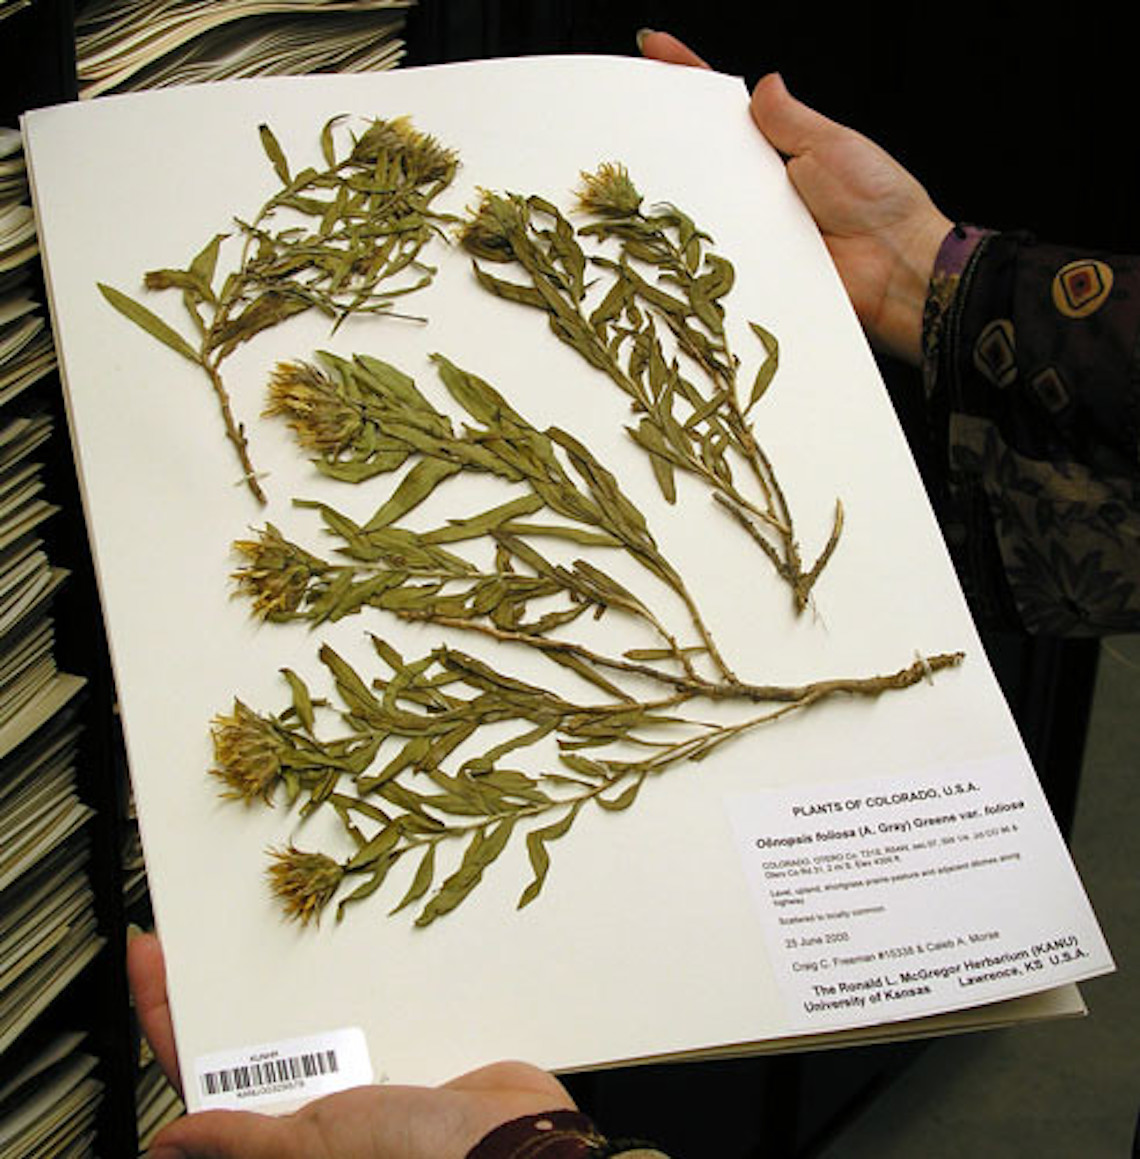 Pressed, preserved plant specimen from the collection with a bar code on the paper and plant details.